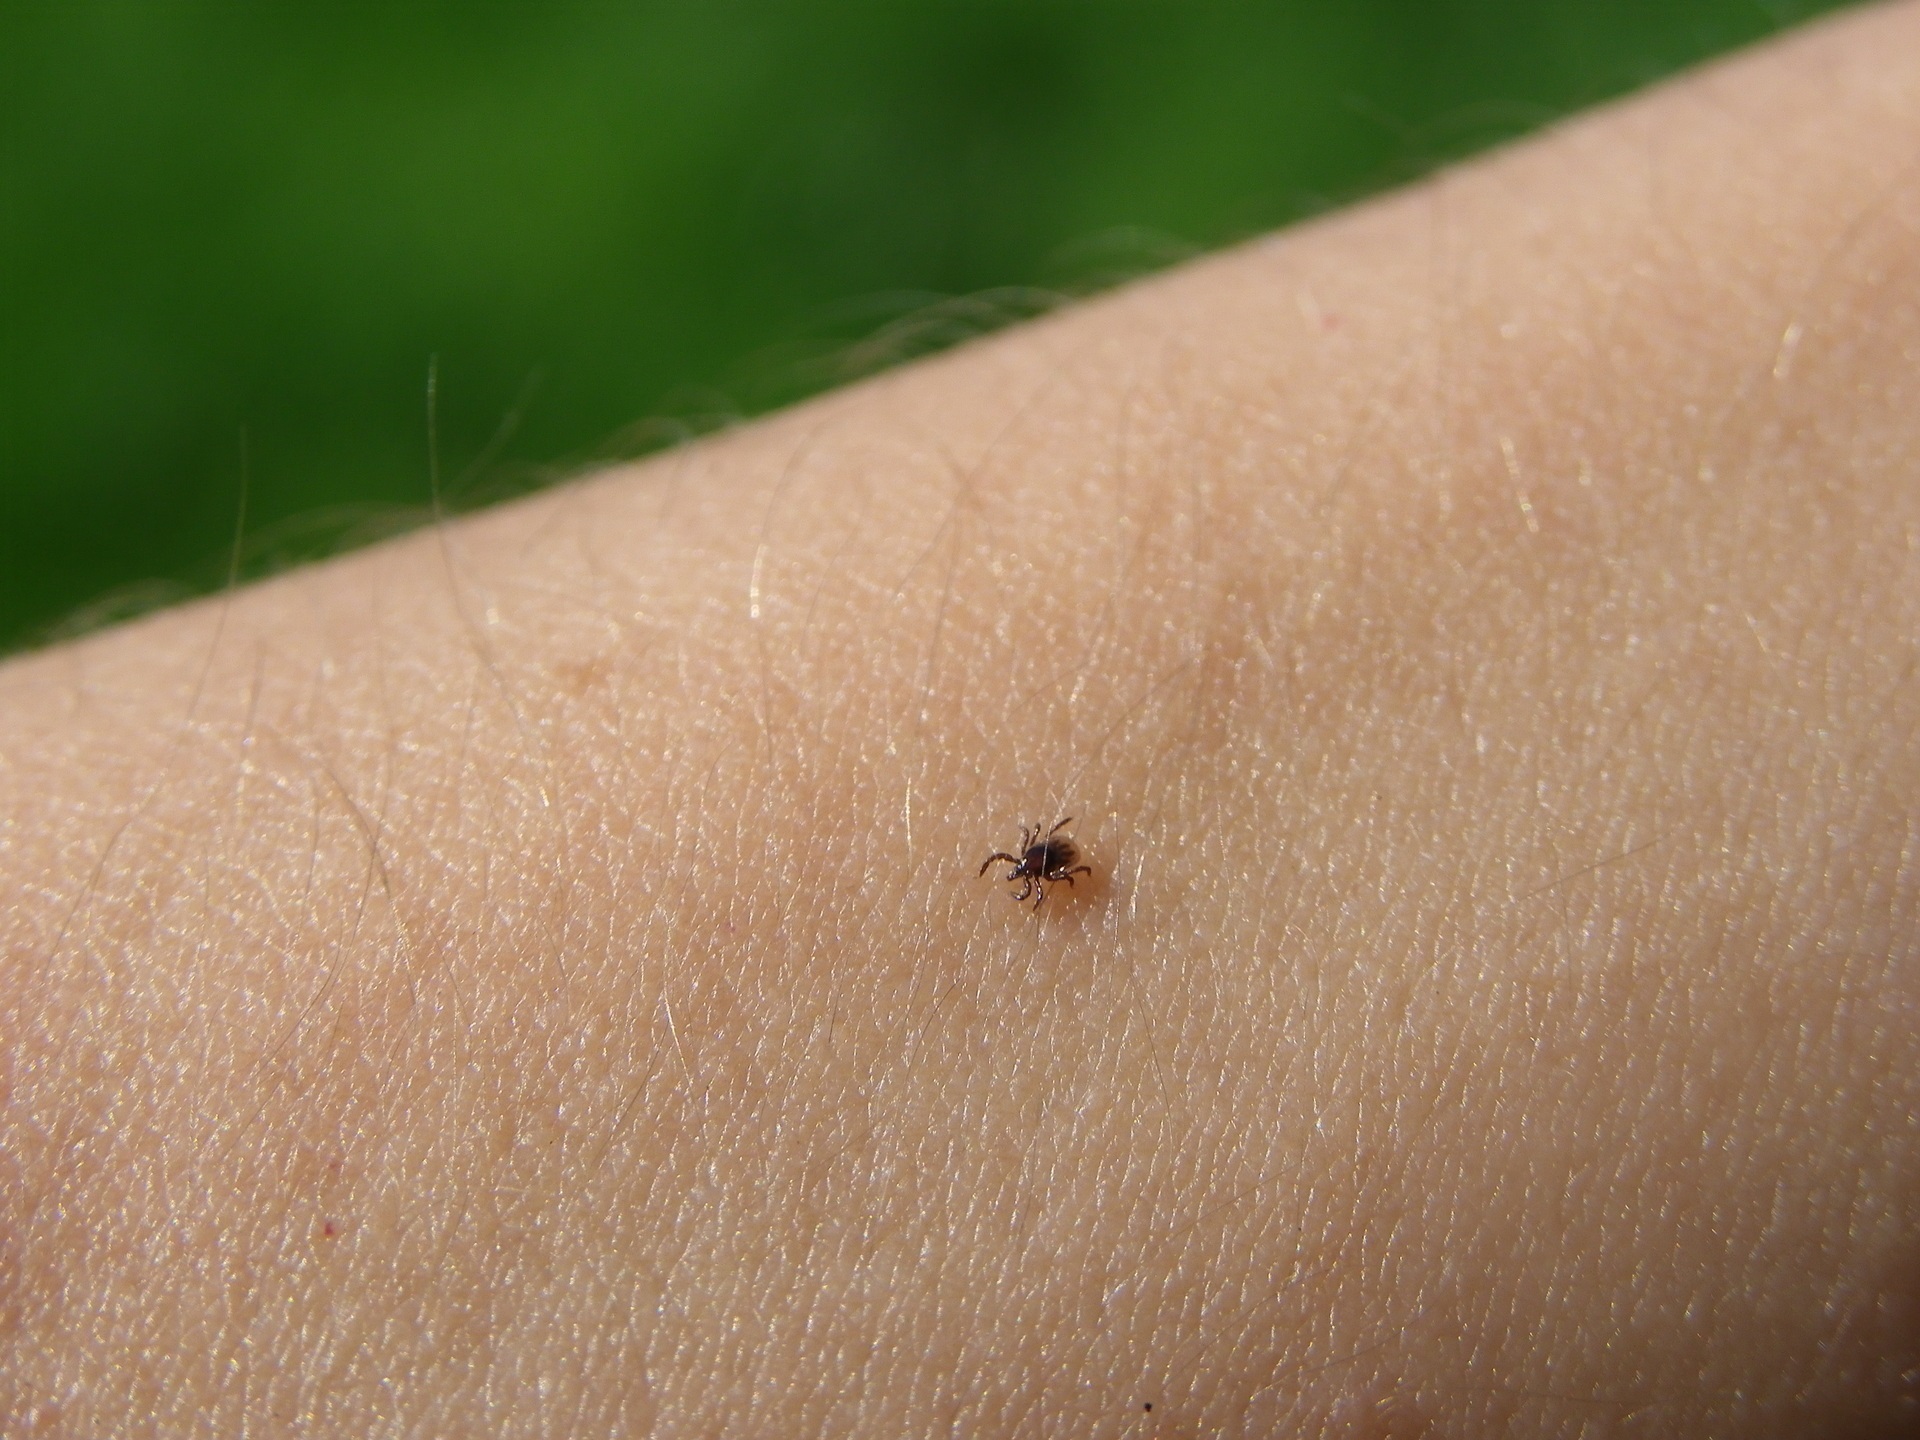 A tick on a person's skin, in a file image.